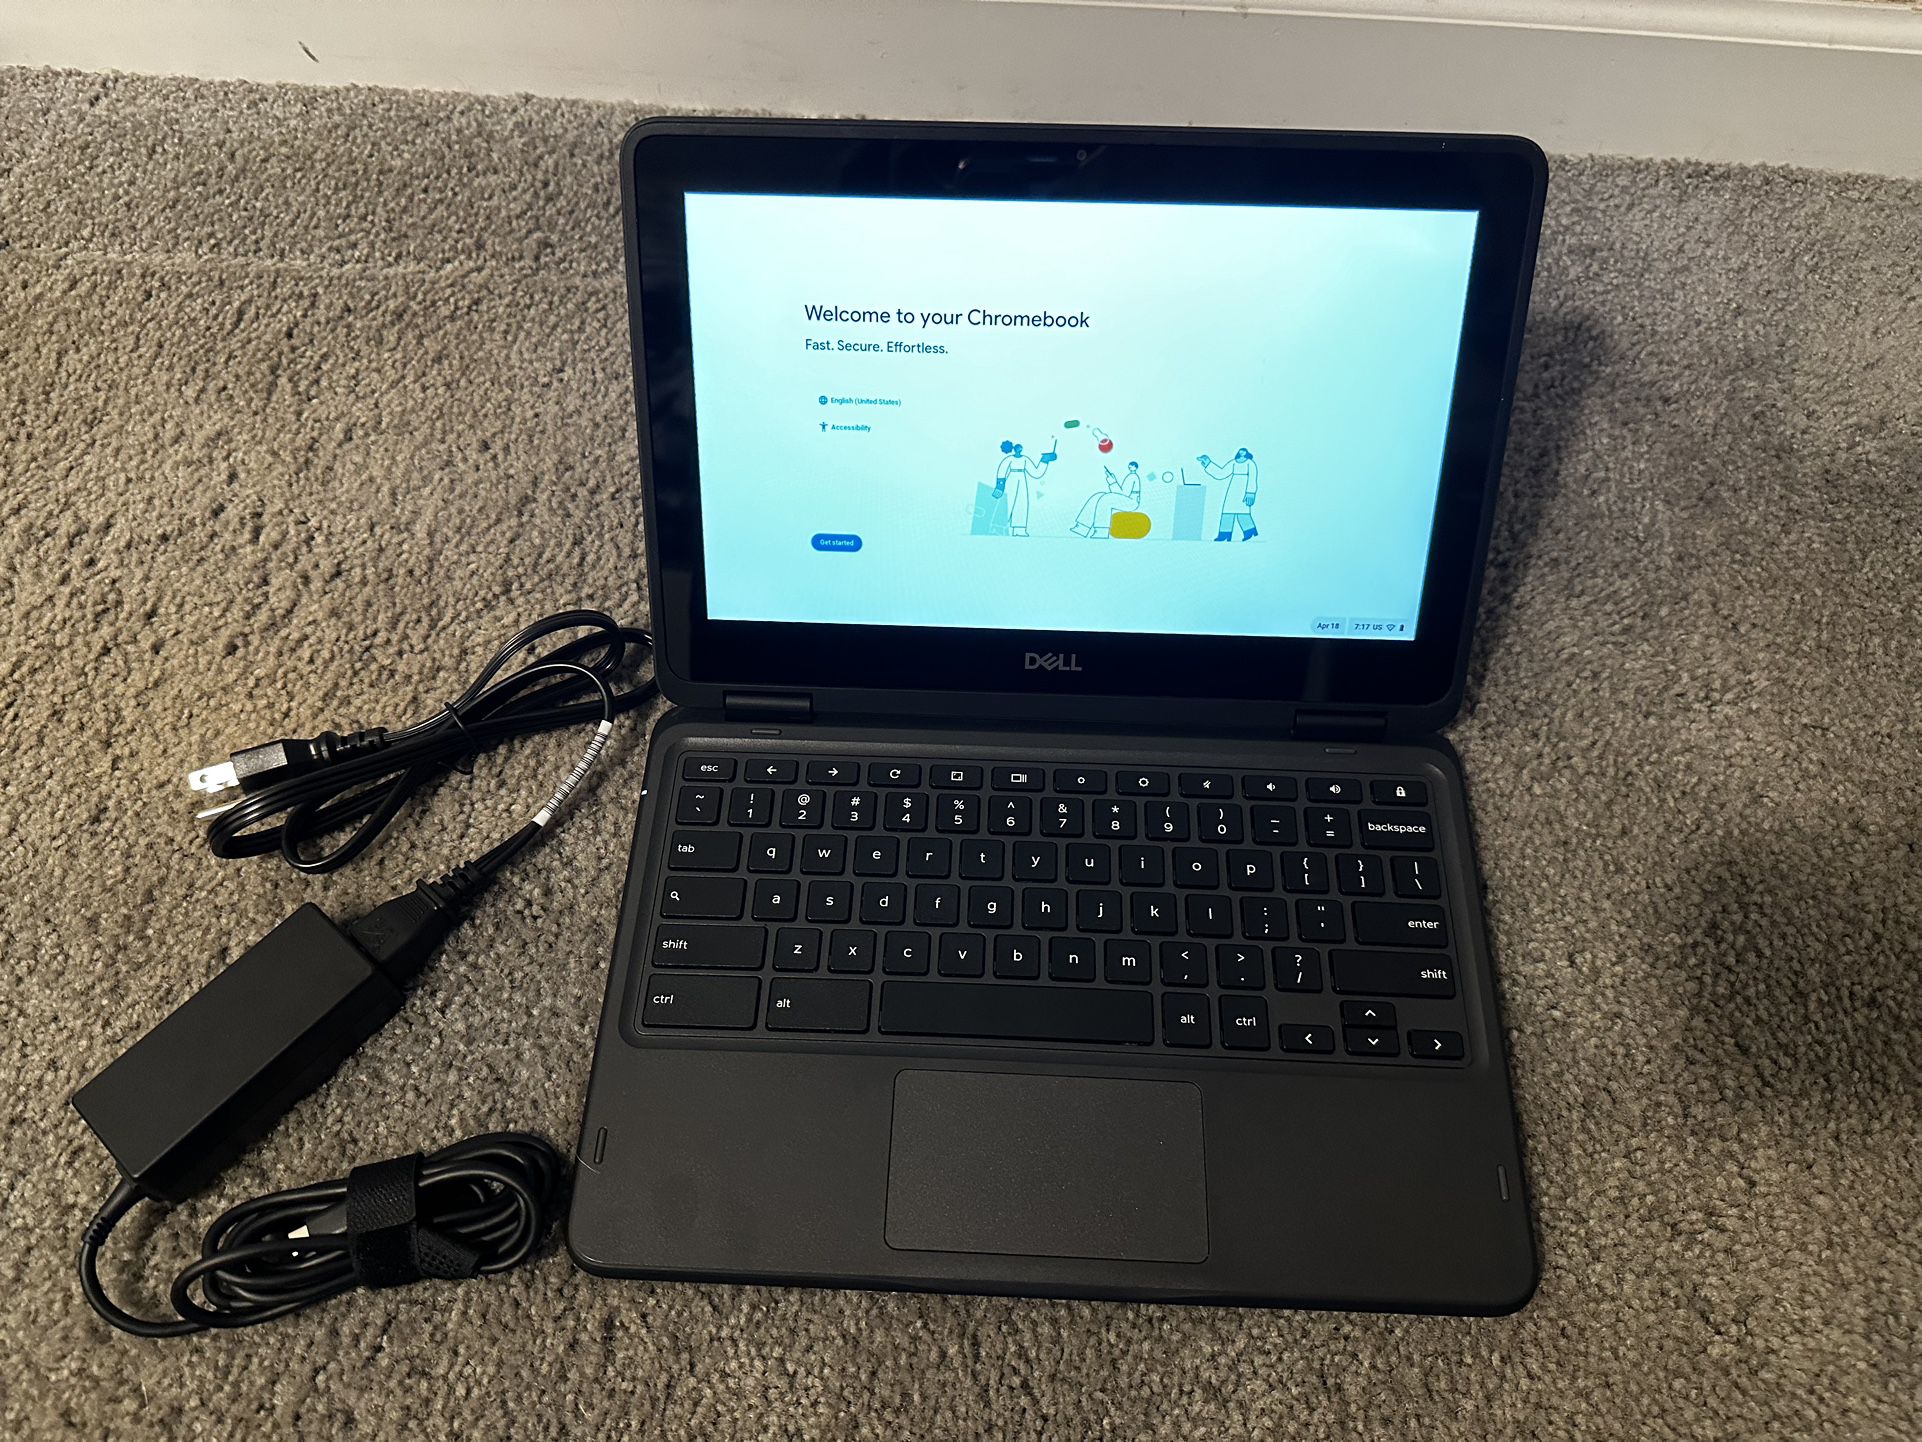 Dell Chromebook 11 3100 2-in- 1 Laptop